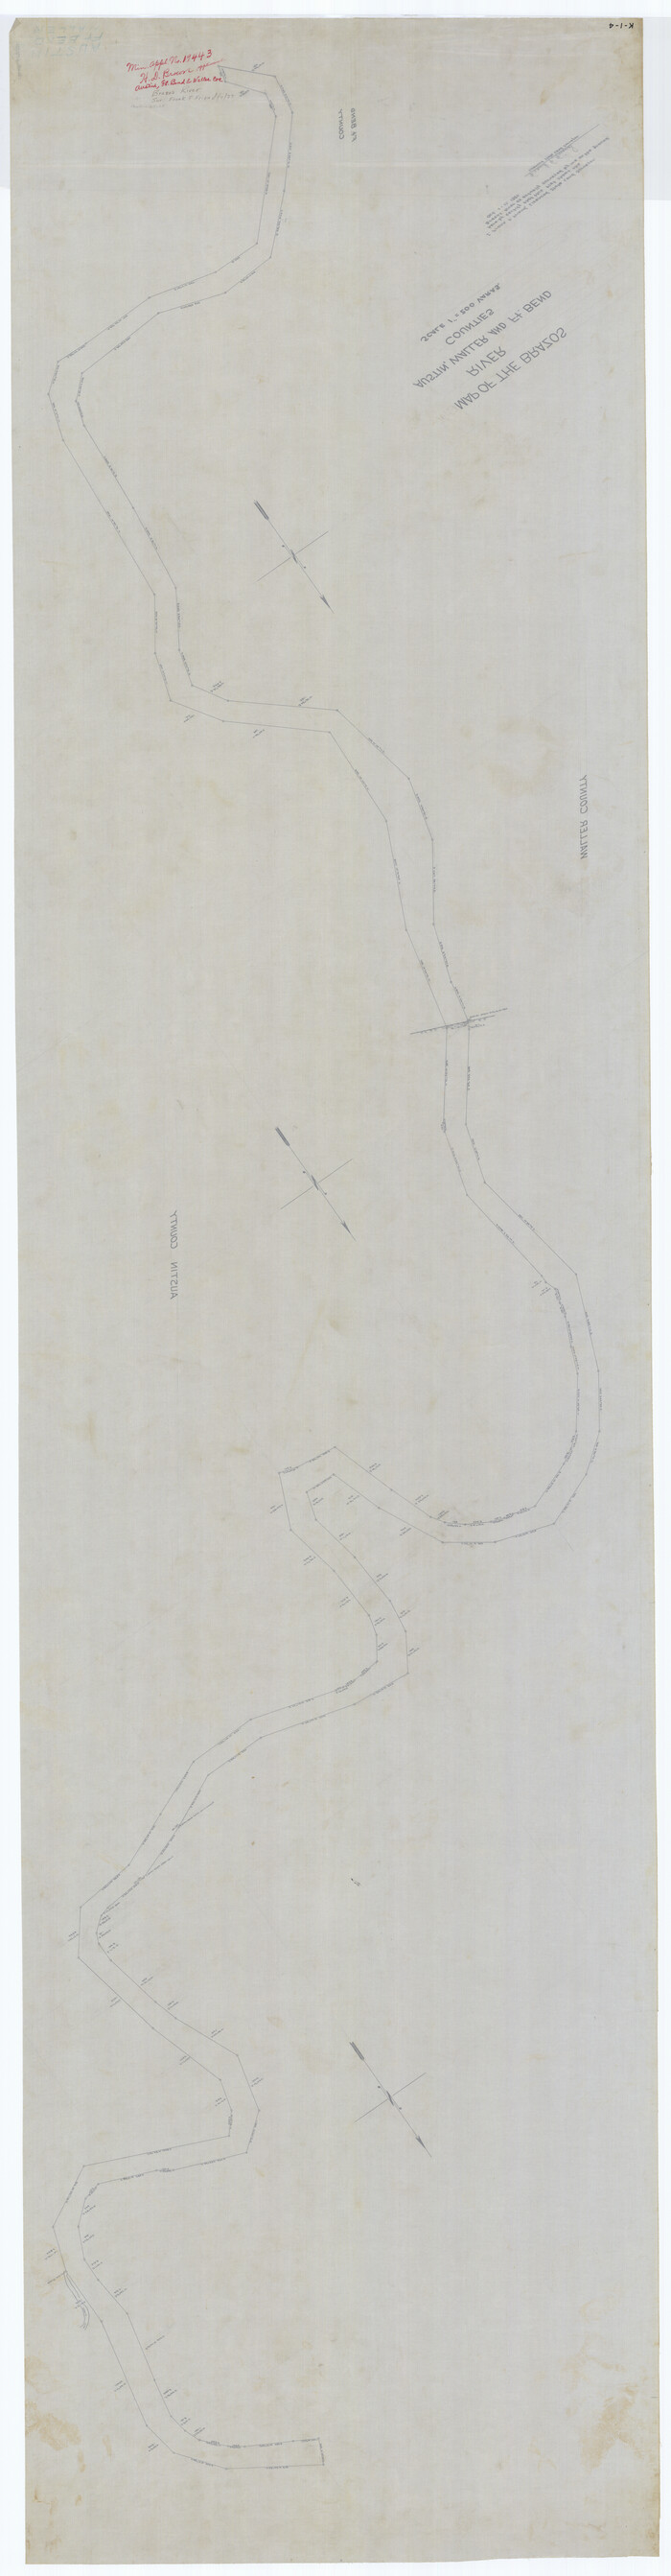 65683, [Sketch for Mineral Application 19443 - Brazos River], General Map Collection